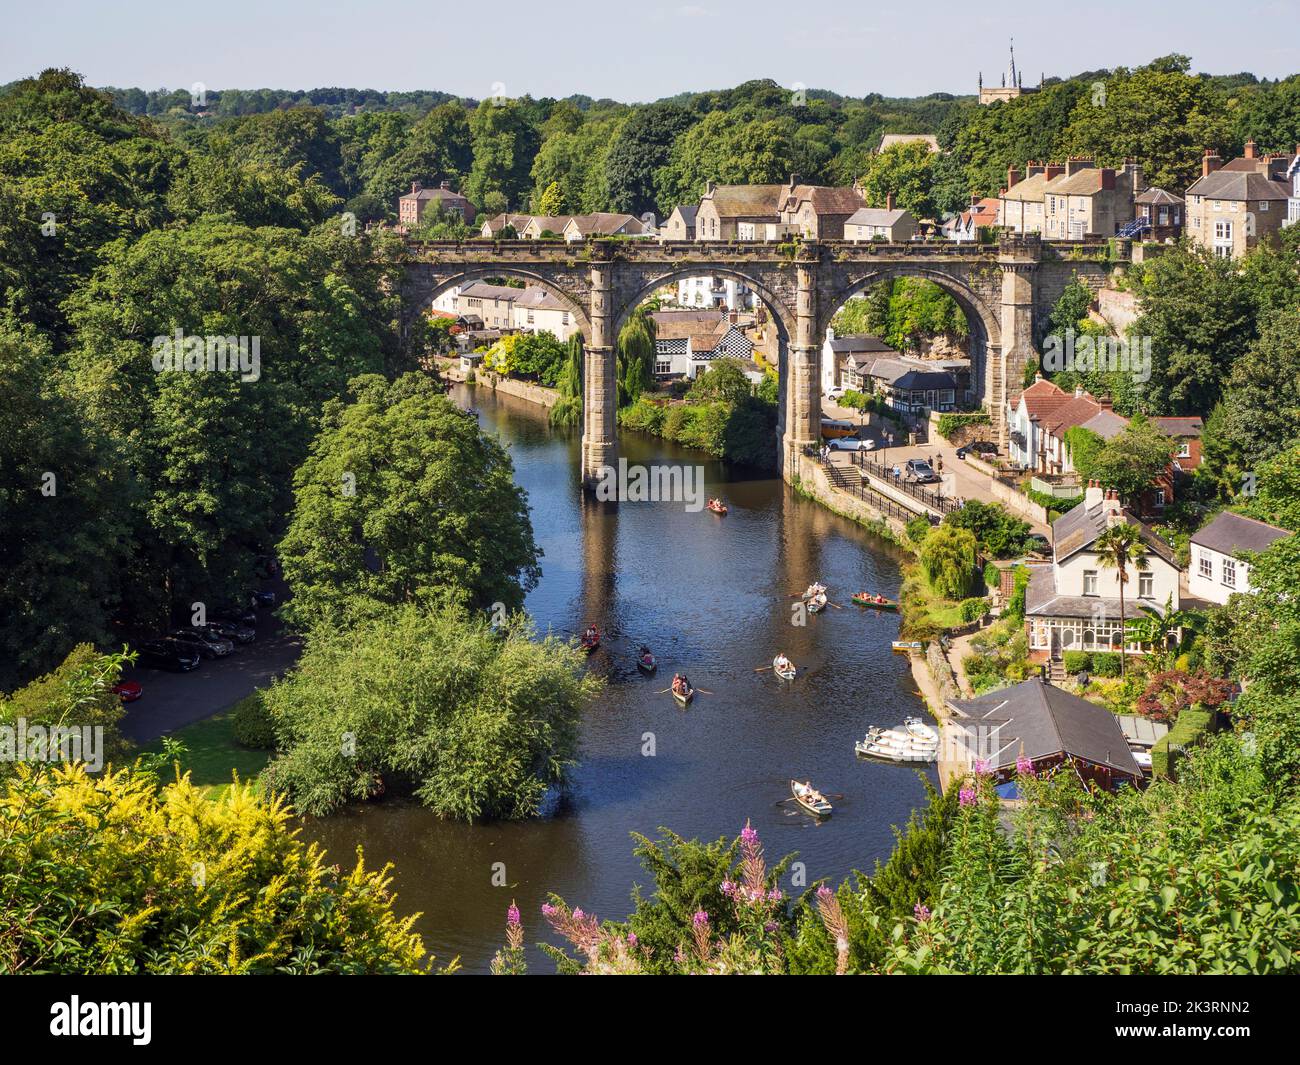 View of the Railway Viaduct over the River Nidd from the Castle Grounds at Knaresborough North Yorkshire England Stock Photo